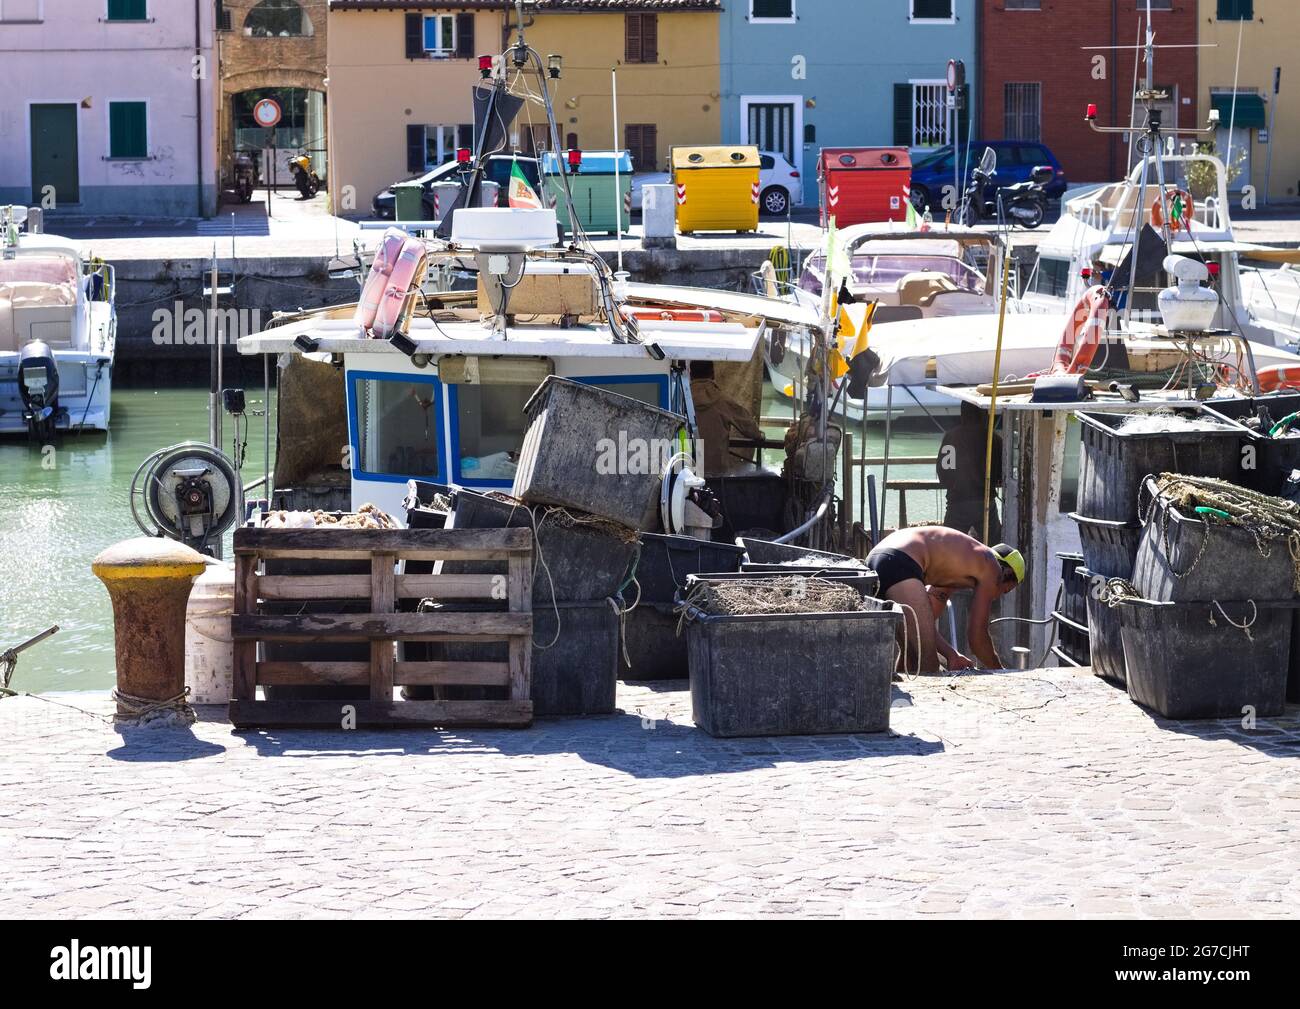 Pesaro, Italy - 09 july 2020: A fisherman is working on his fishing boat at the port of Pesaro with tools of the trade, fishing nets and boxes Stock Photo